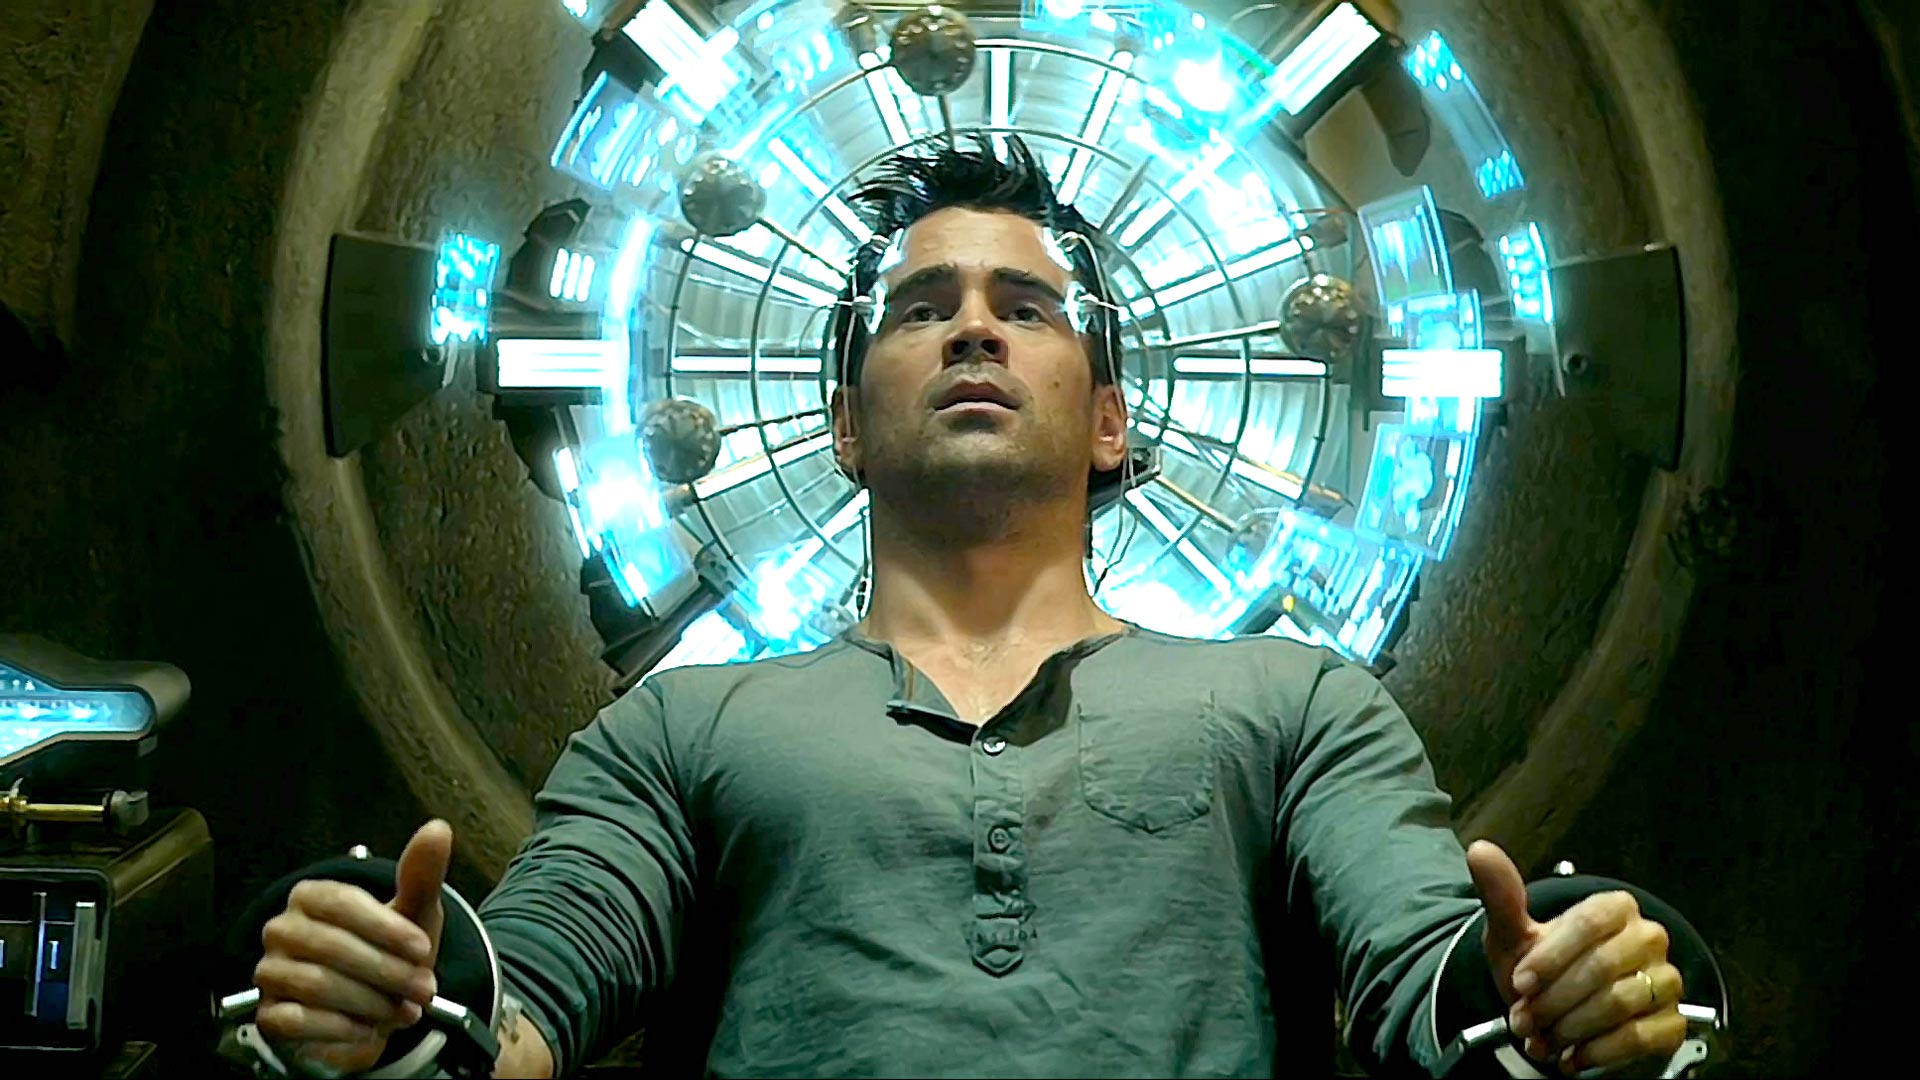 Total Recall (2012) Backgrounds, Compatible - PC, Mobile, Gadgets| 1920x1080 px